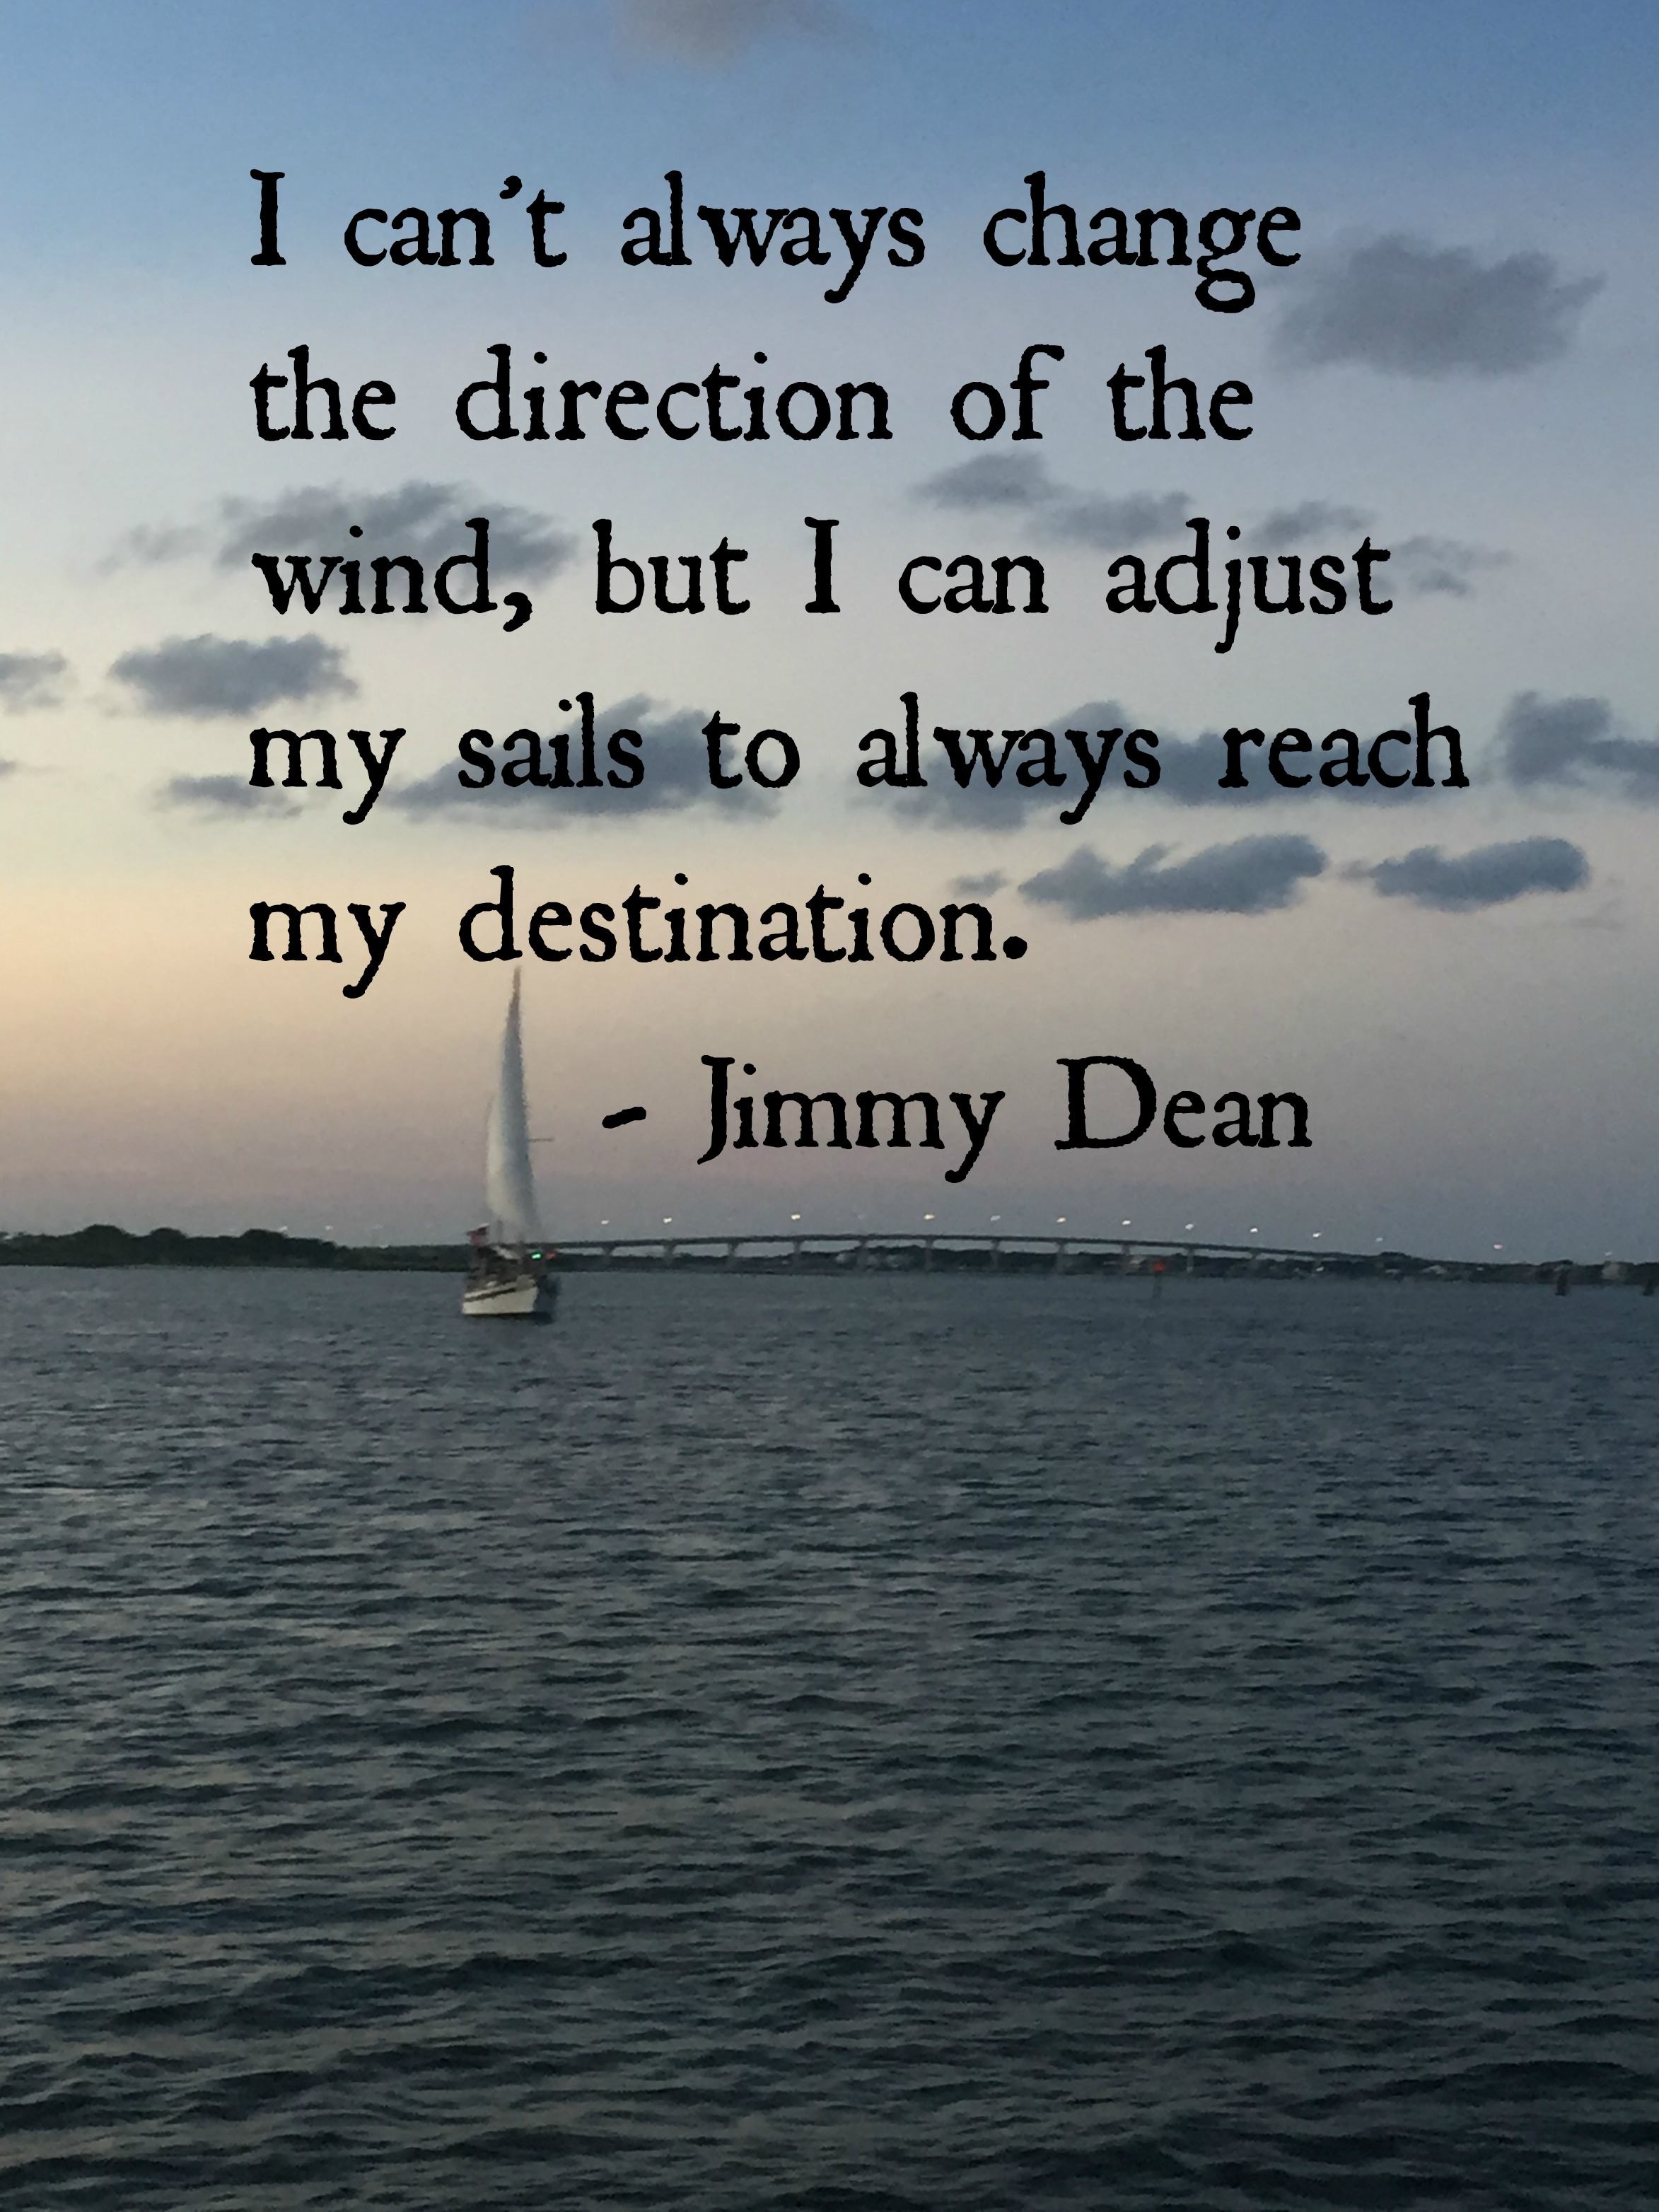 I can't always change the direction of the wind, but I can adjust my sails to always reach my destination.